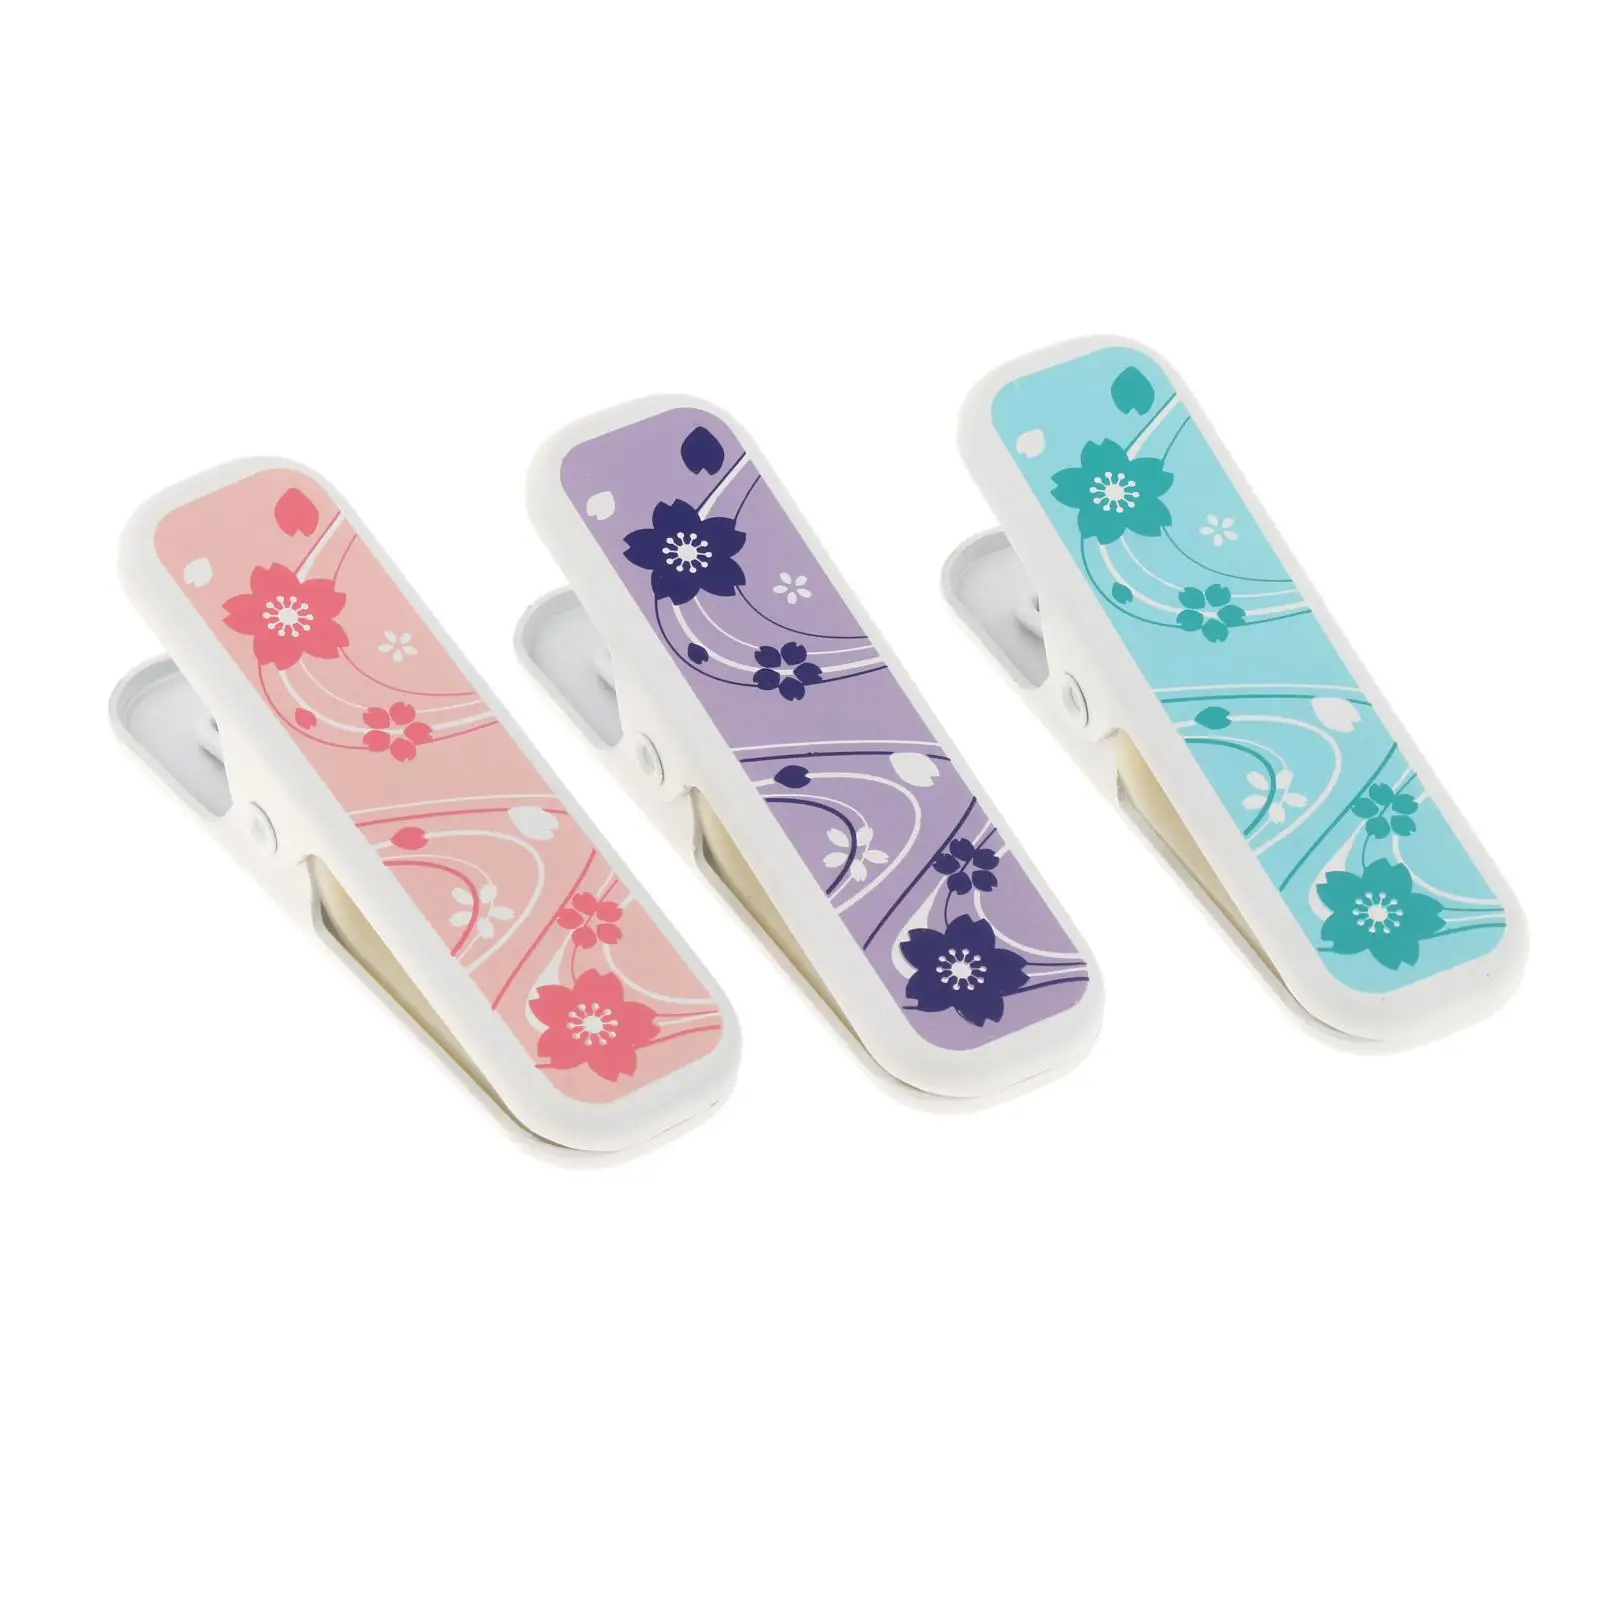 3Pcs Japanese Kimono Dressing Clips Accessories Holders for Kimono Hobbyists Even Beginners Clothing Clips Handy Perfect Gift